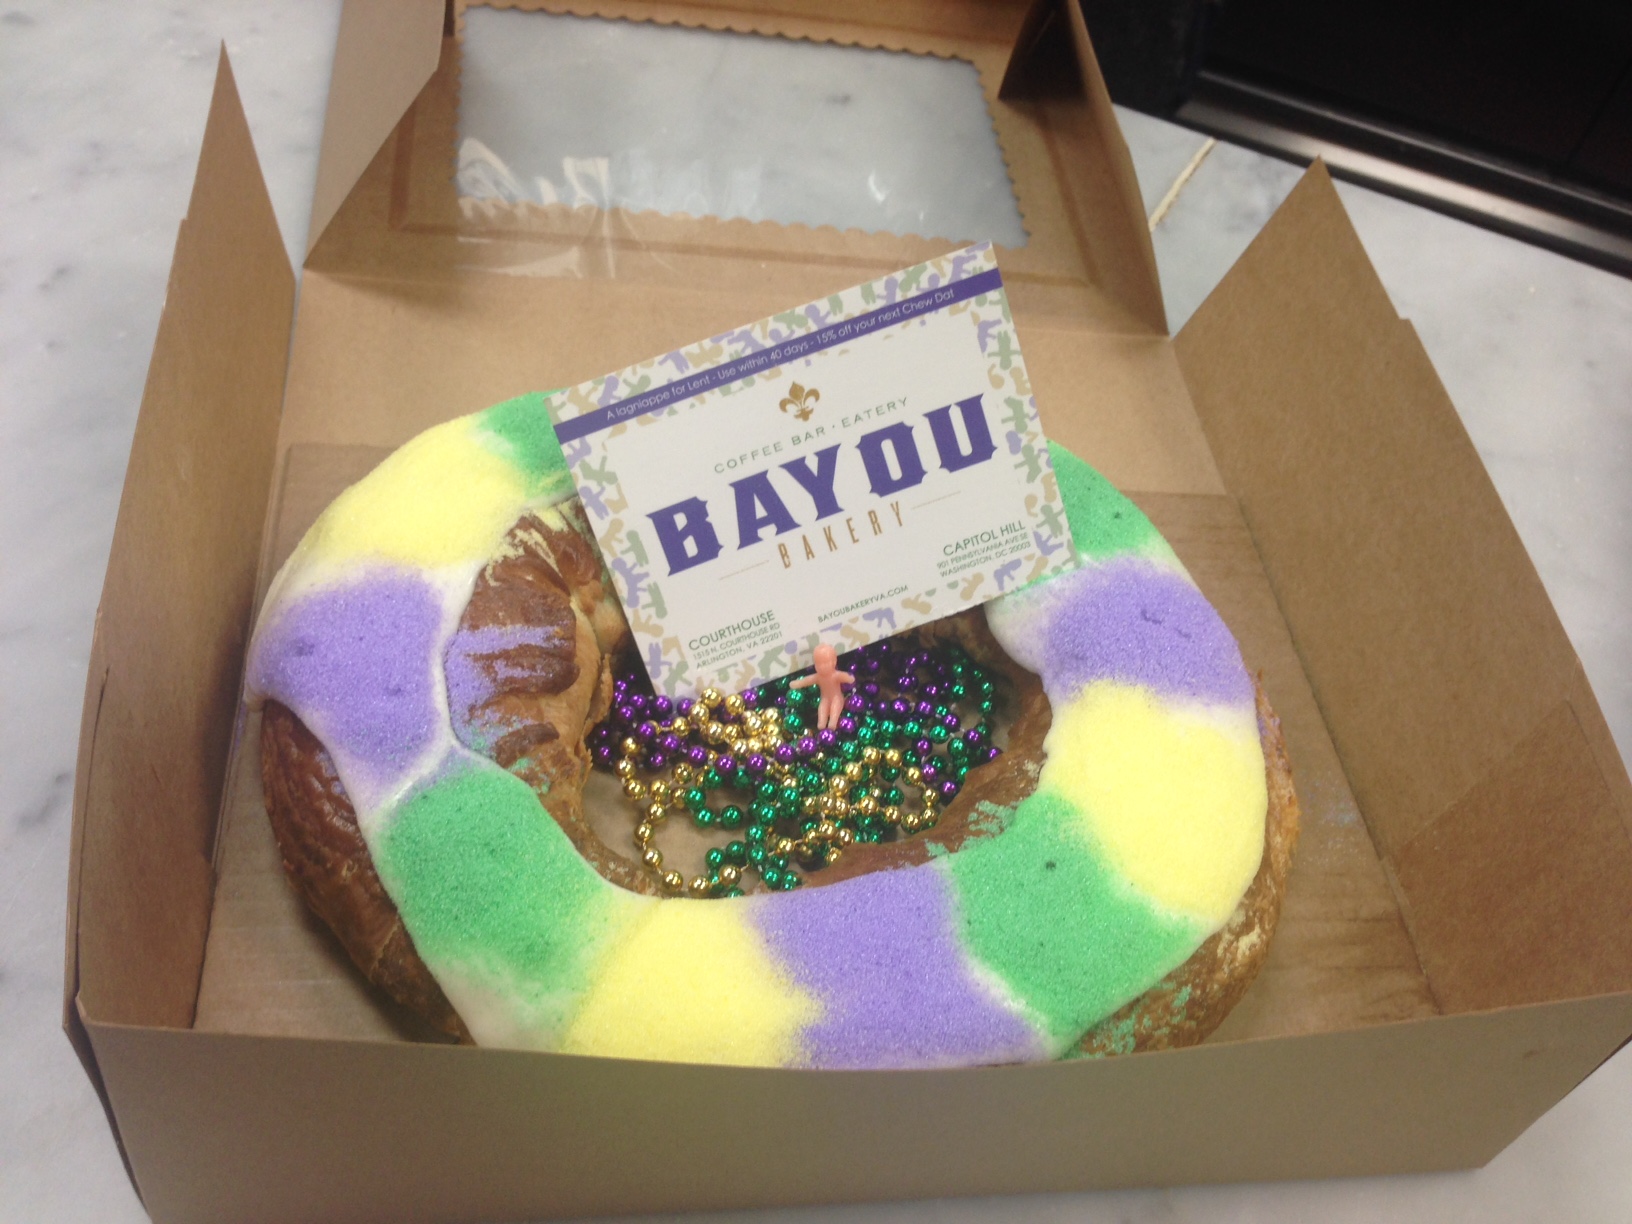 King cake is a traditional sweet that's served each year during Carnival season. (WTOP/Samantha Loss) 